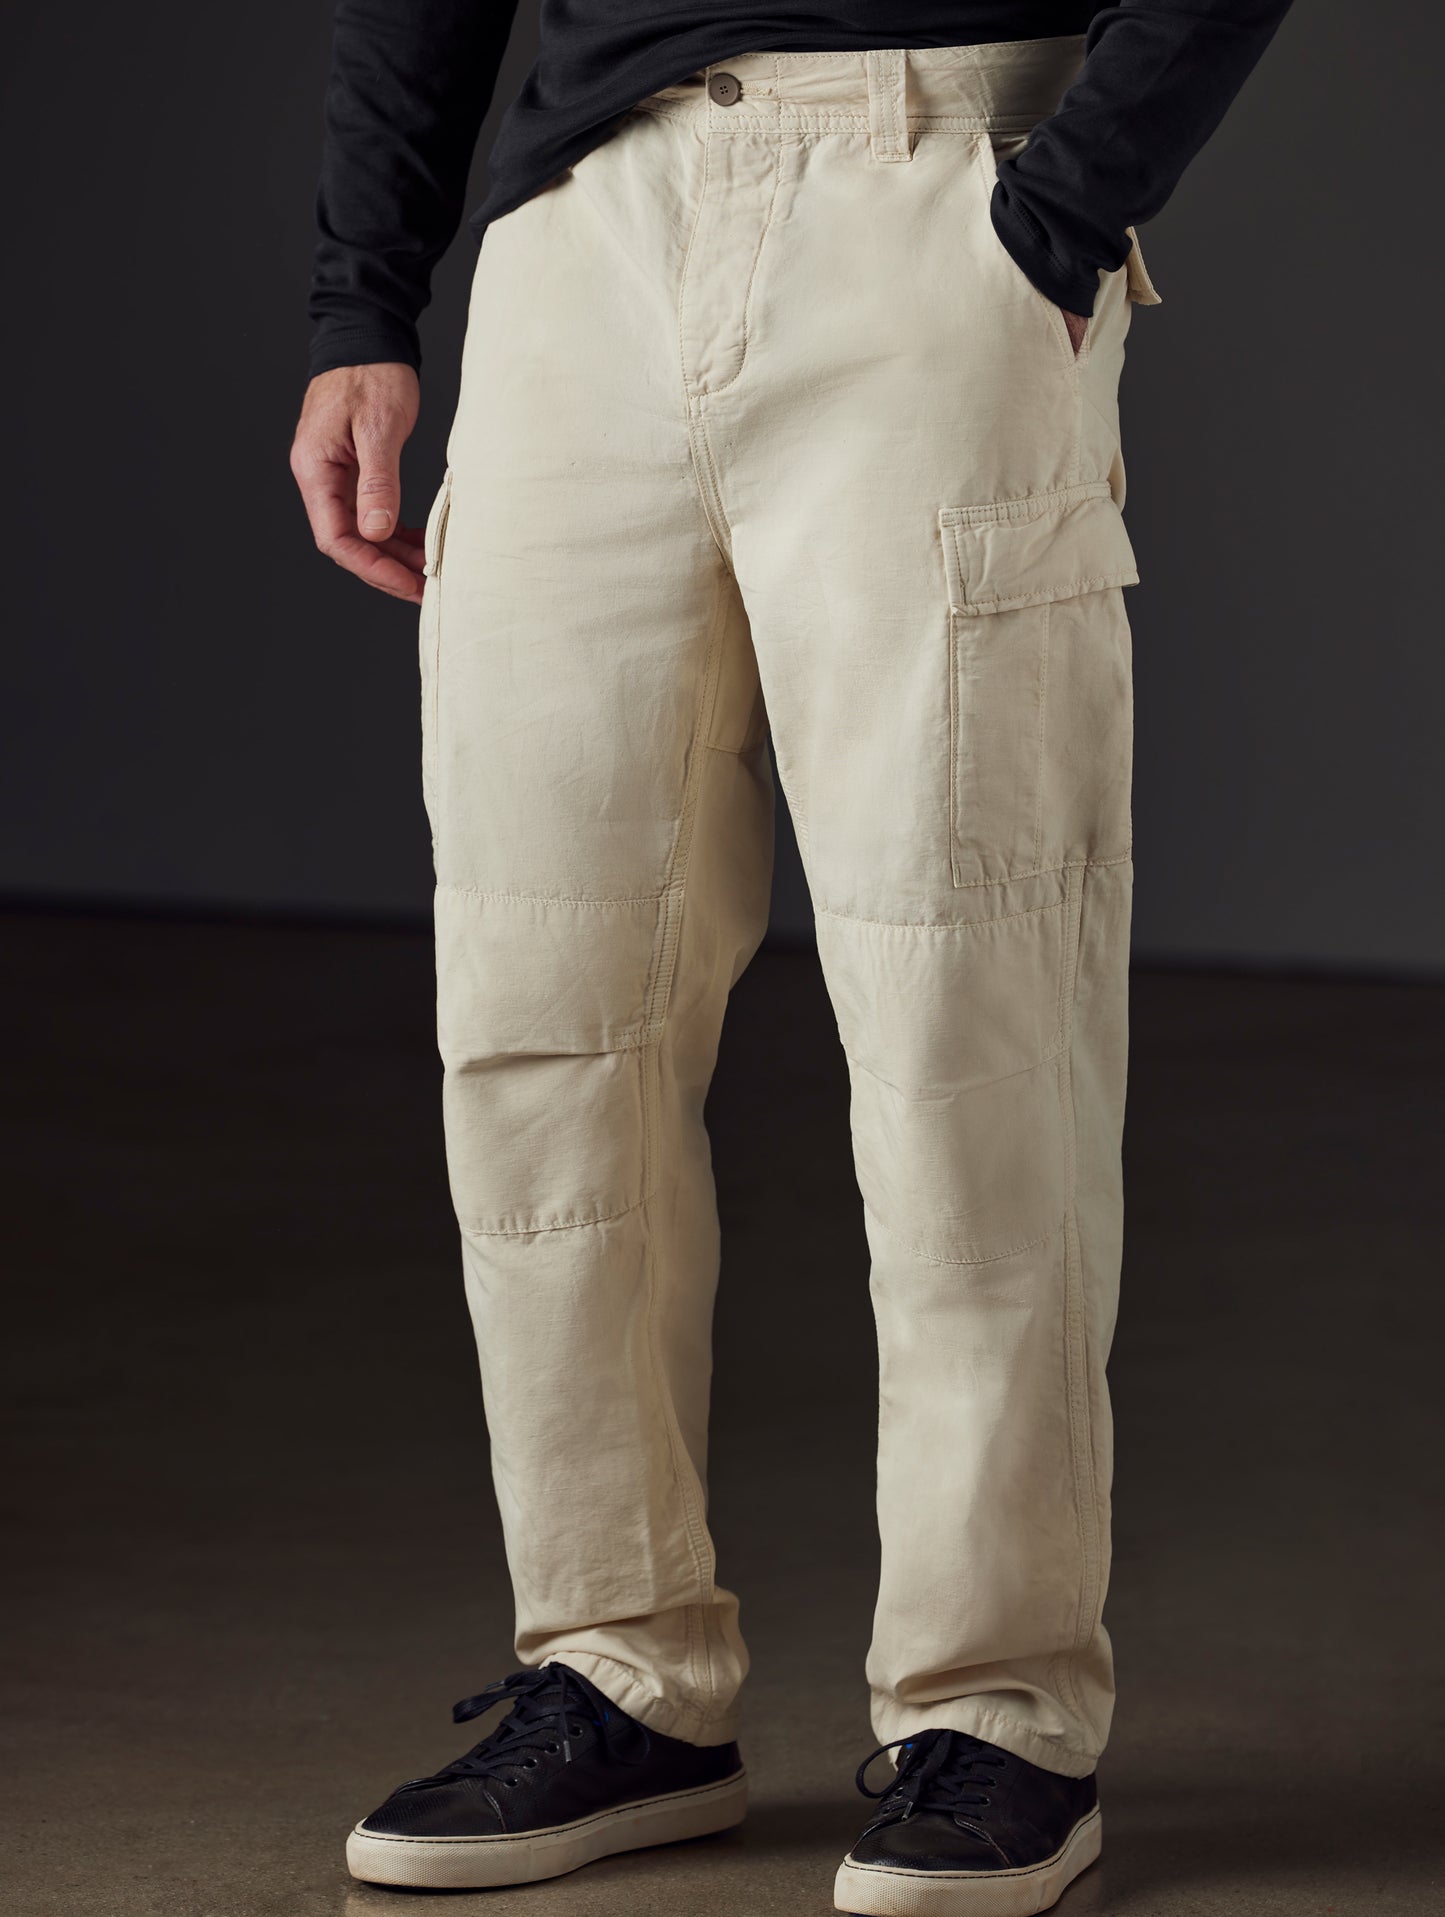 beige fatigue pants from AETHER Apparel